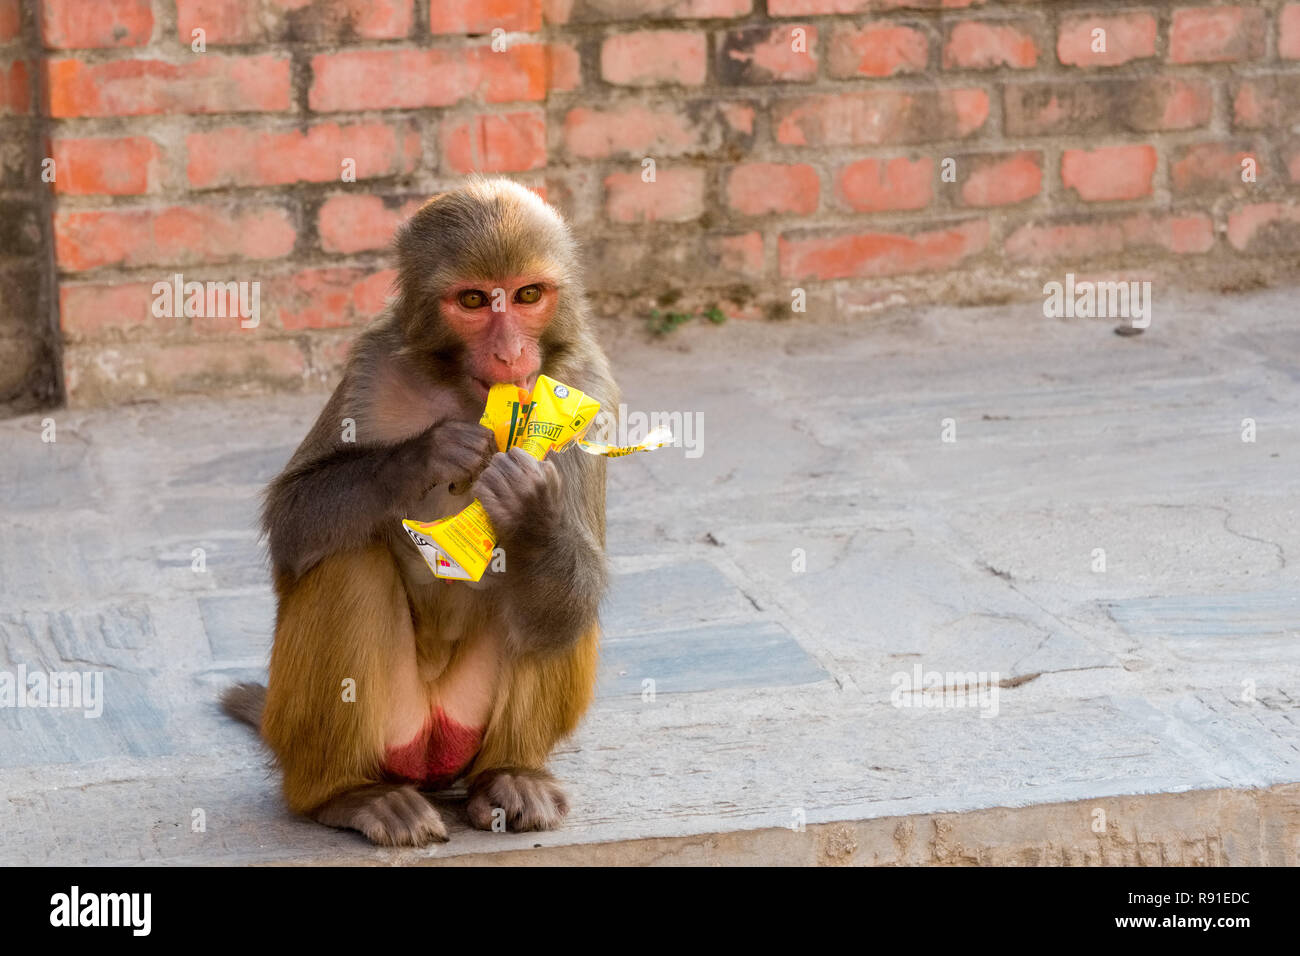 A monkey at Pashupatinath temple in Kathmandu eating discarded drink carton Stock Photo